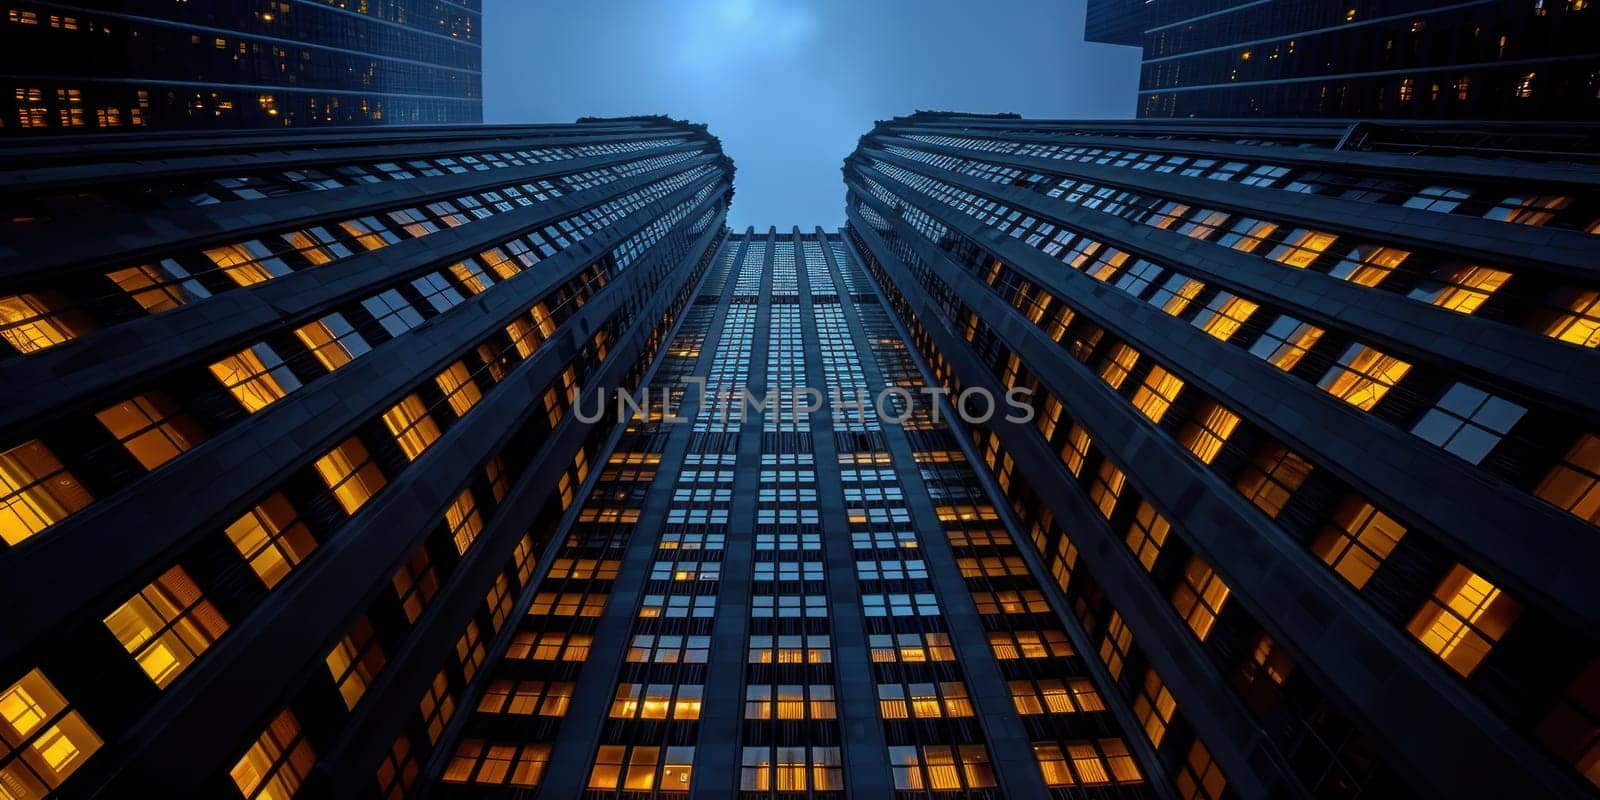 A city skyline with tall buildings and a cloudy sky. The buildings are lit up with yellow lights, creating a warm and inviting atmosphere. Concept of urban life and the hustle